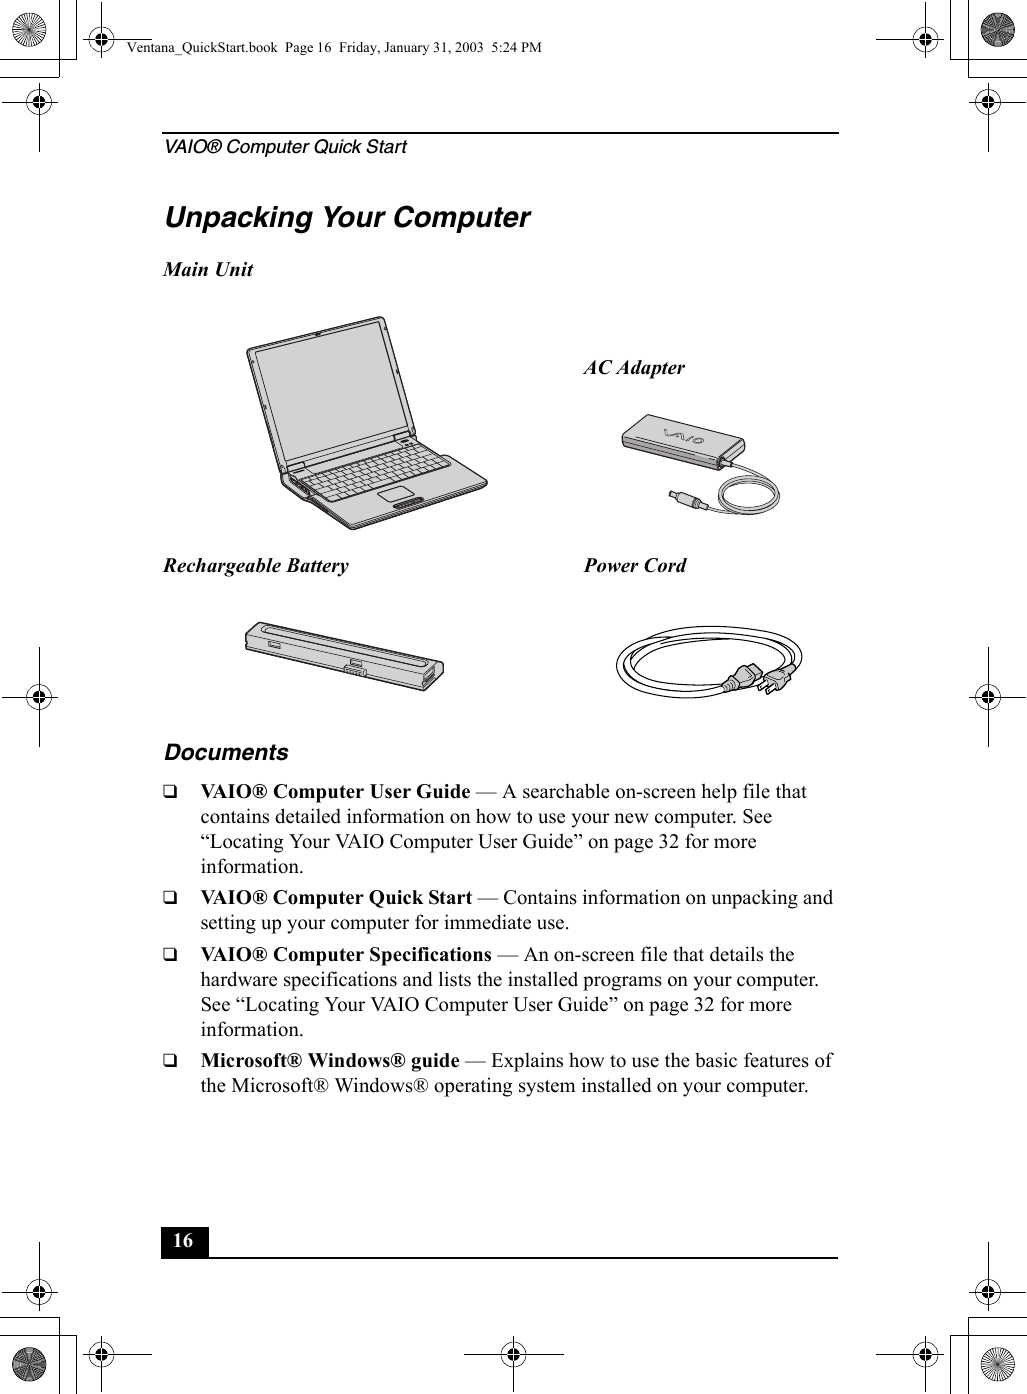 VAIO® Computer Quick Start16Unpacking Your ComputerDocuments❑VAIO® Computer User Guide — A searchable on-screen help file that contains detailed information on how to use your new computer. See “Locating Your VAIO Computer User Guide” on page 32 for more information.❑VAIO® Computer Quick Start — Contains information on unpacking and setting up your computer for immediate use.❑VAIO® Computer Specifications — An on-screen file that details the hardware specifications and lists the installed programs on your computer. See “Locating Your VAIO Computer User Guide” on page 32 for more information.❑Microsoft® Windows® guide — Explains how to use the basic features of the Microsoft® Windows® operating system installed on your computer.Main UnitAC AdapterRechargeable Battery Power CordVentana_QuickStart.book  Page 16  Friday, January 31, 2003  5:24 PM